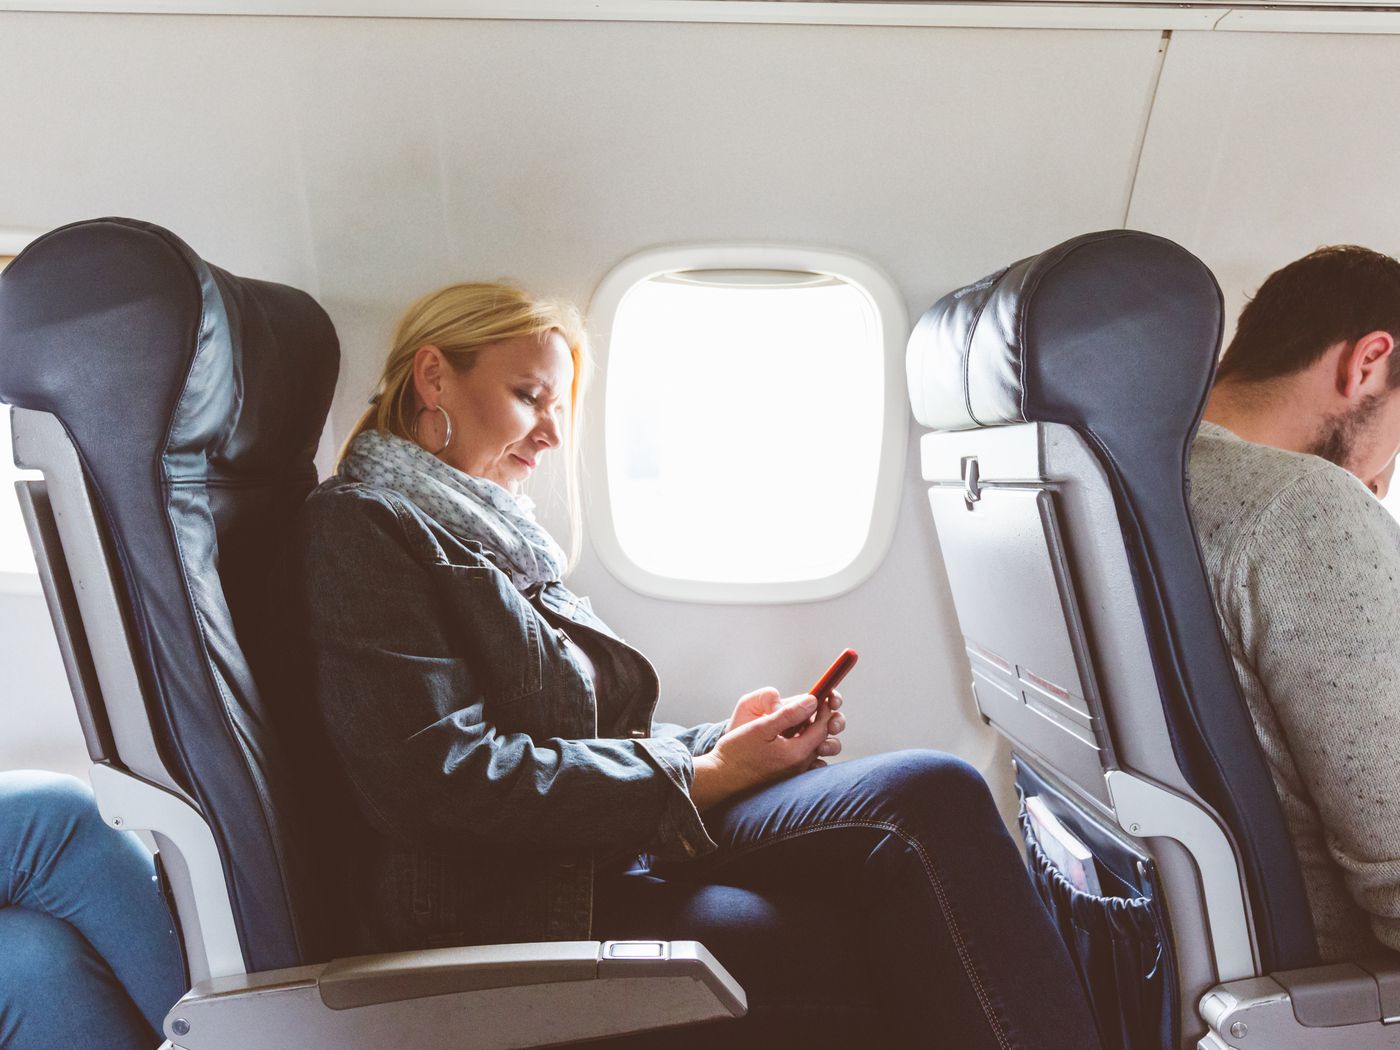 Should You Recline On An Airplane The Perennial Seat Debate